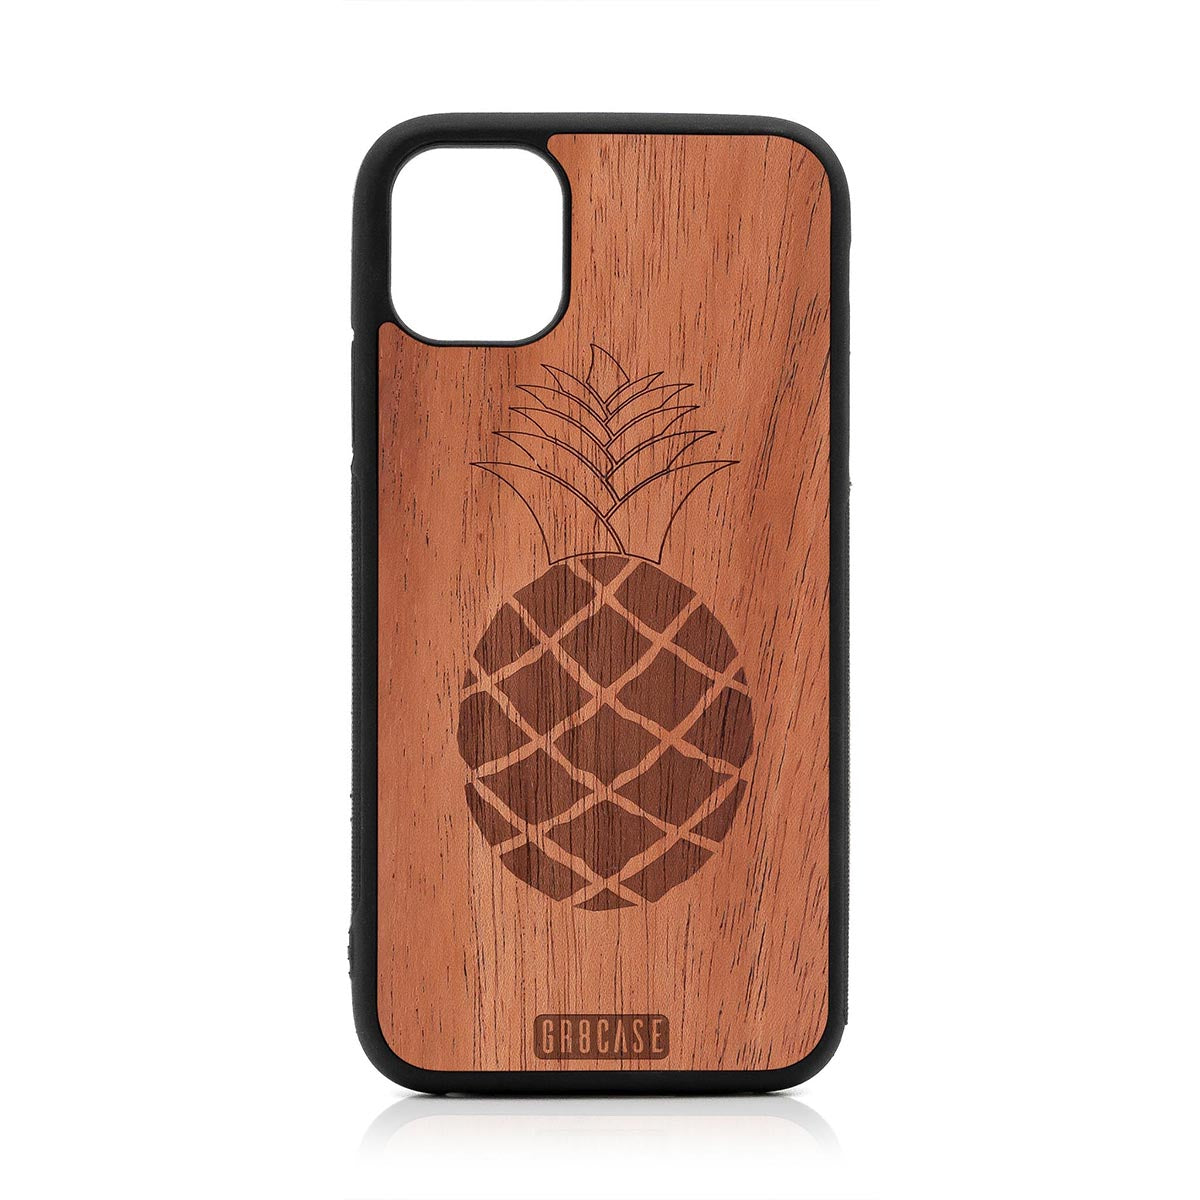 Pineapple Design Wood Case For iPhone 11 by GR8CASE